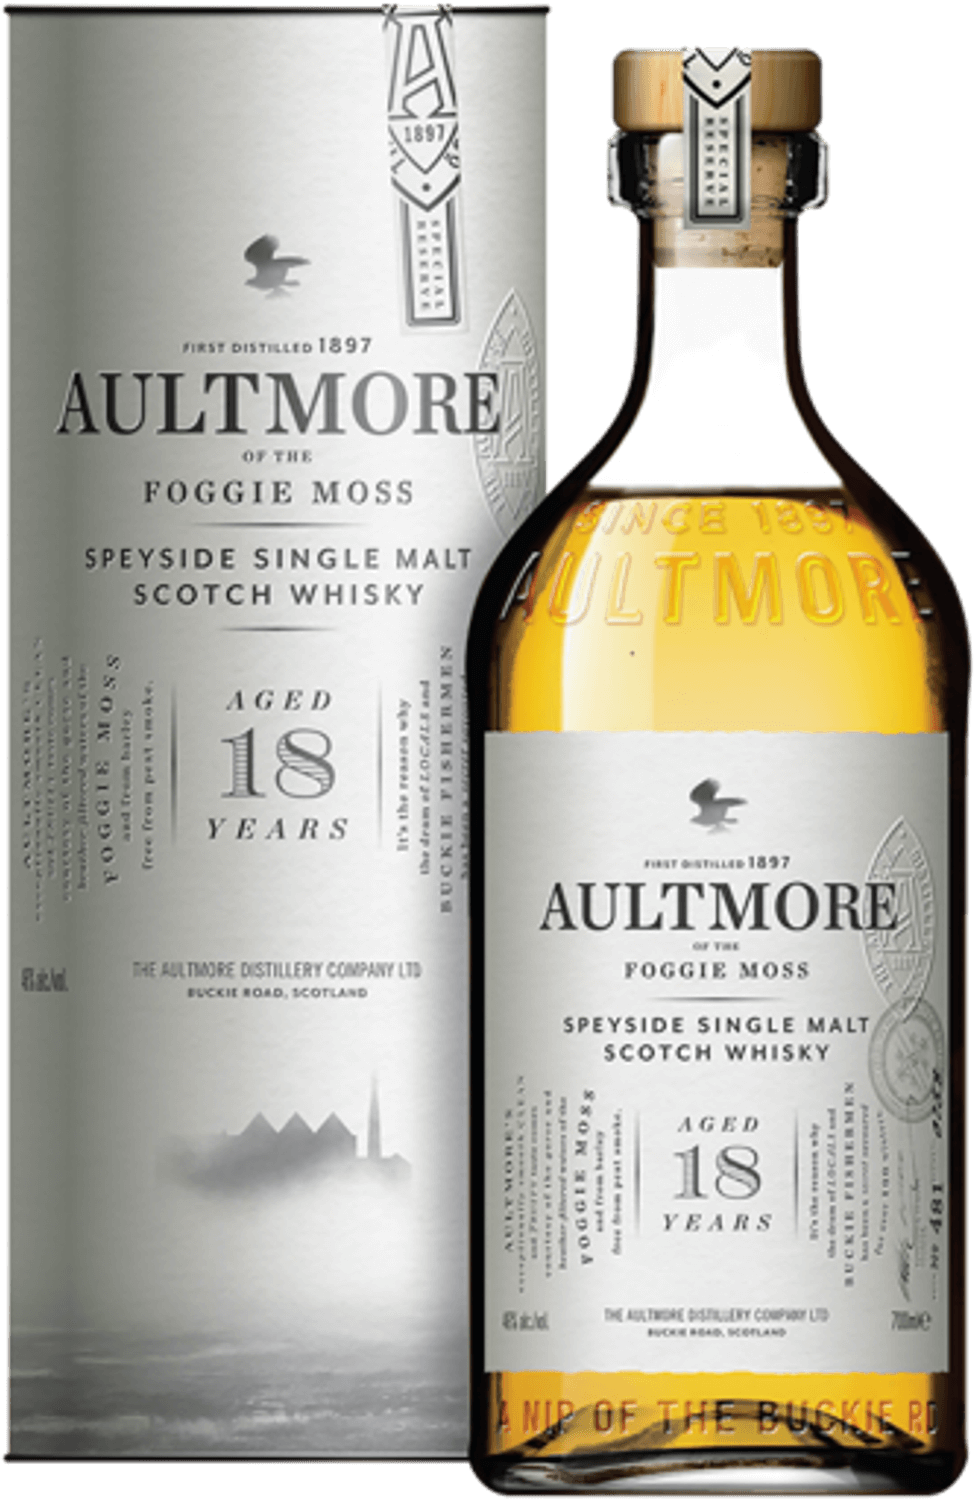 Aultmore 18 Years Old Speyside Single Malt Scotch Whisky (gift box) craigellachie 13 years old speyside single malt scotch whisky gift box